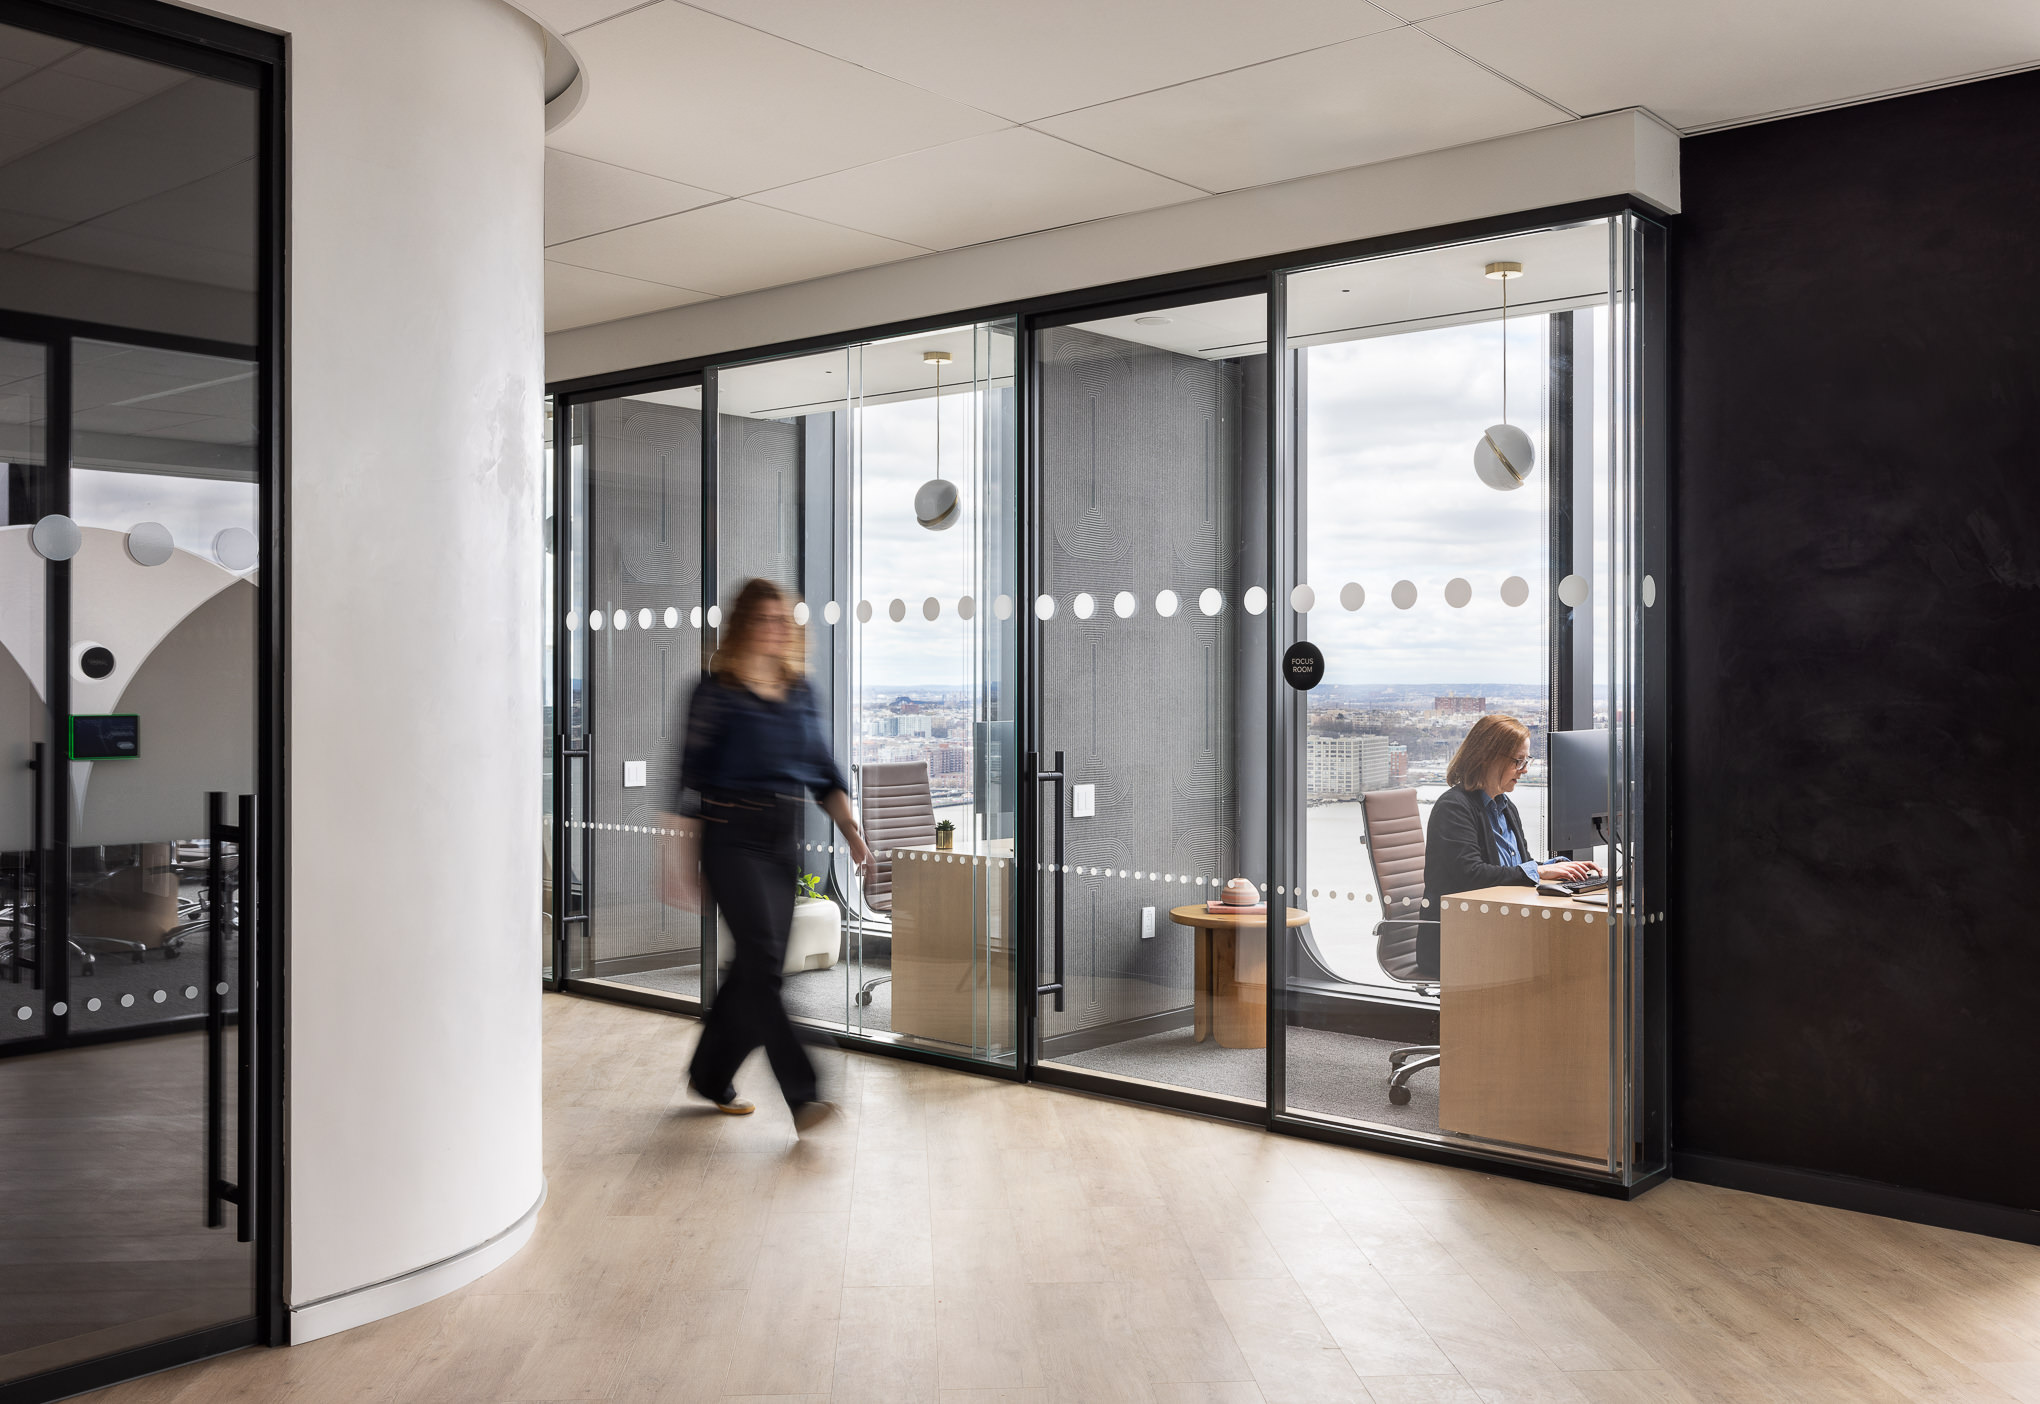 Modern office space with floor-to-ceiling glass partitions maximizing natural light. The interior showcases minimalistic furniture, neutral tones, and accent lighting, blending functionality with a contemporary aesthetic. Reflections hint at a high-rise setting, indicating an urban context for this professional environment.